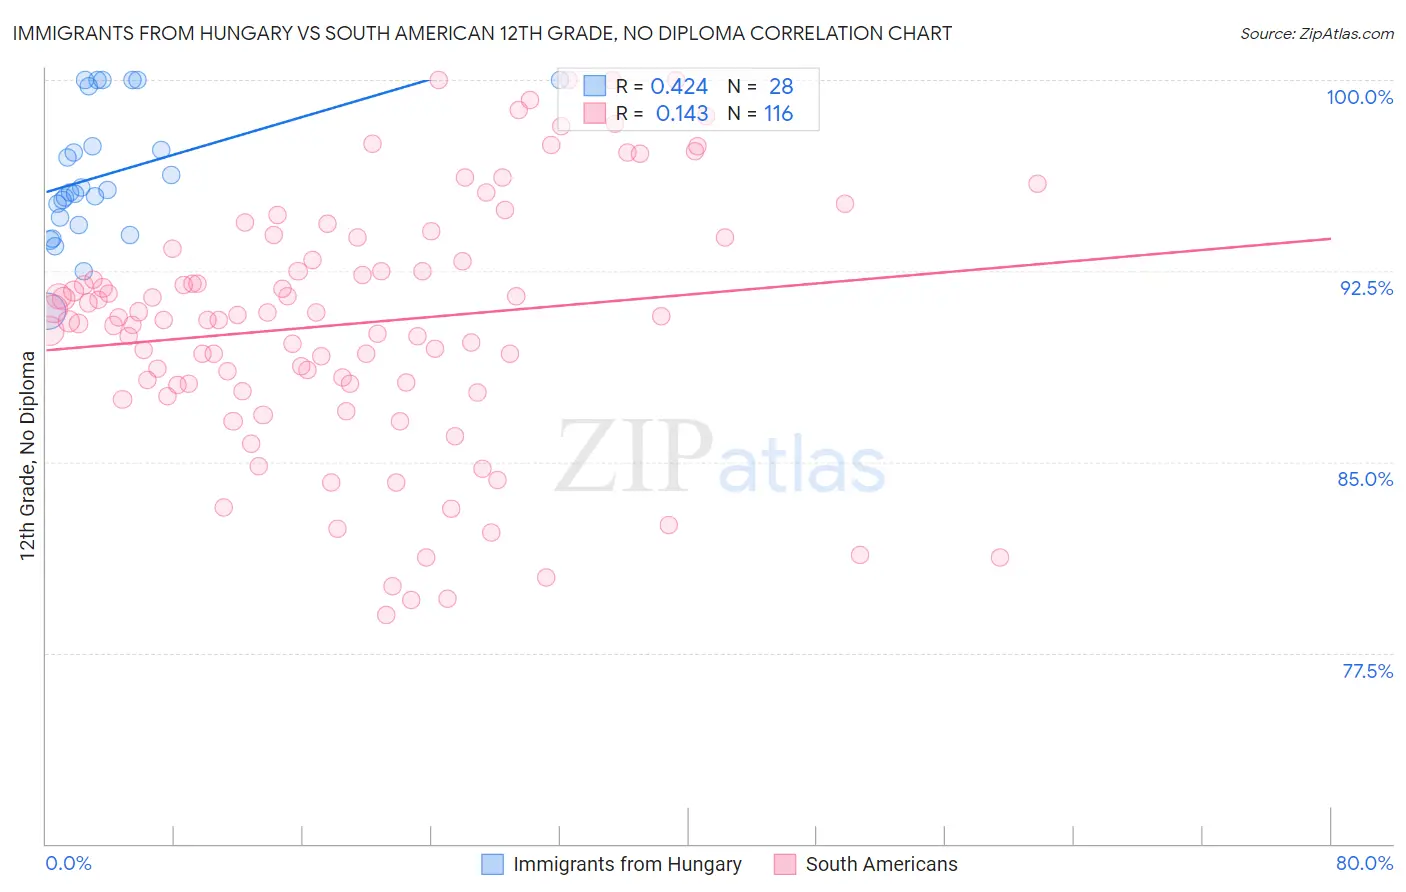 Immigrants from Hungary vs South American 12th Grade, No Diploma